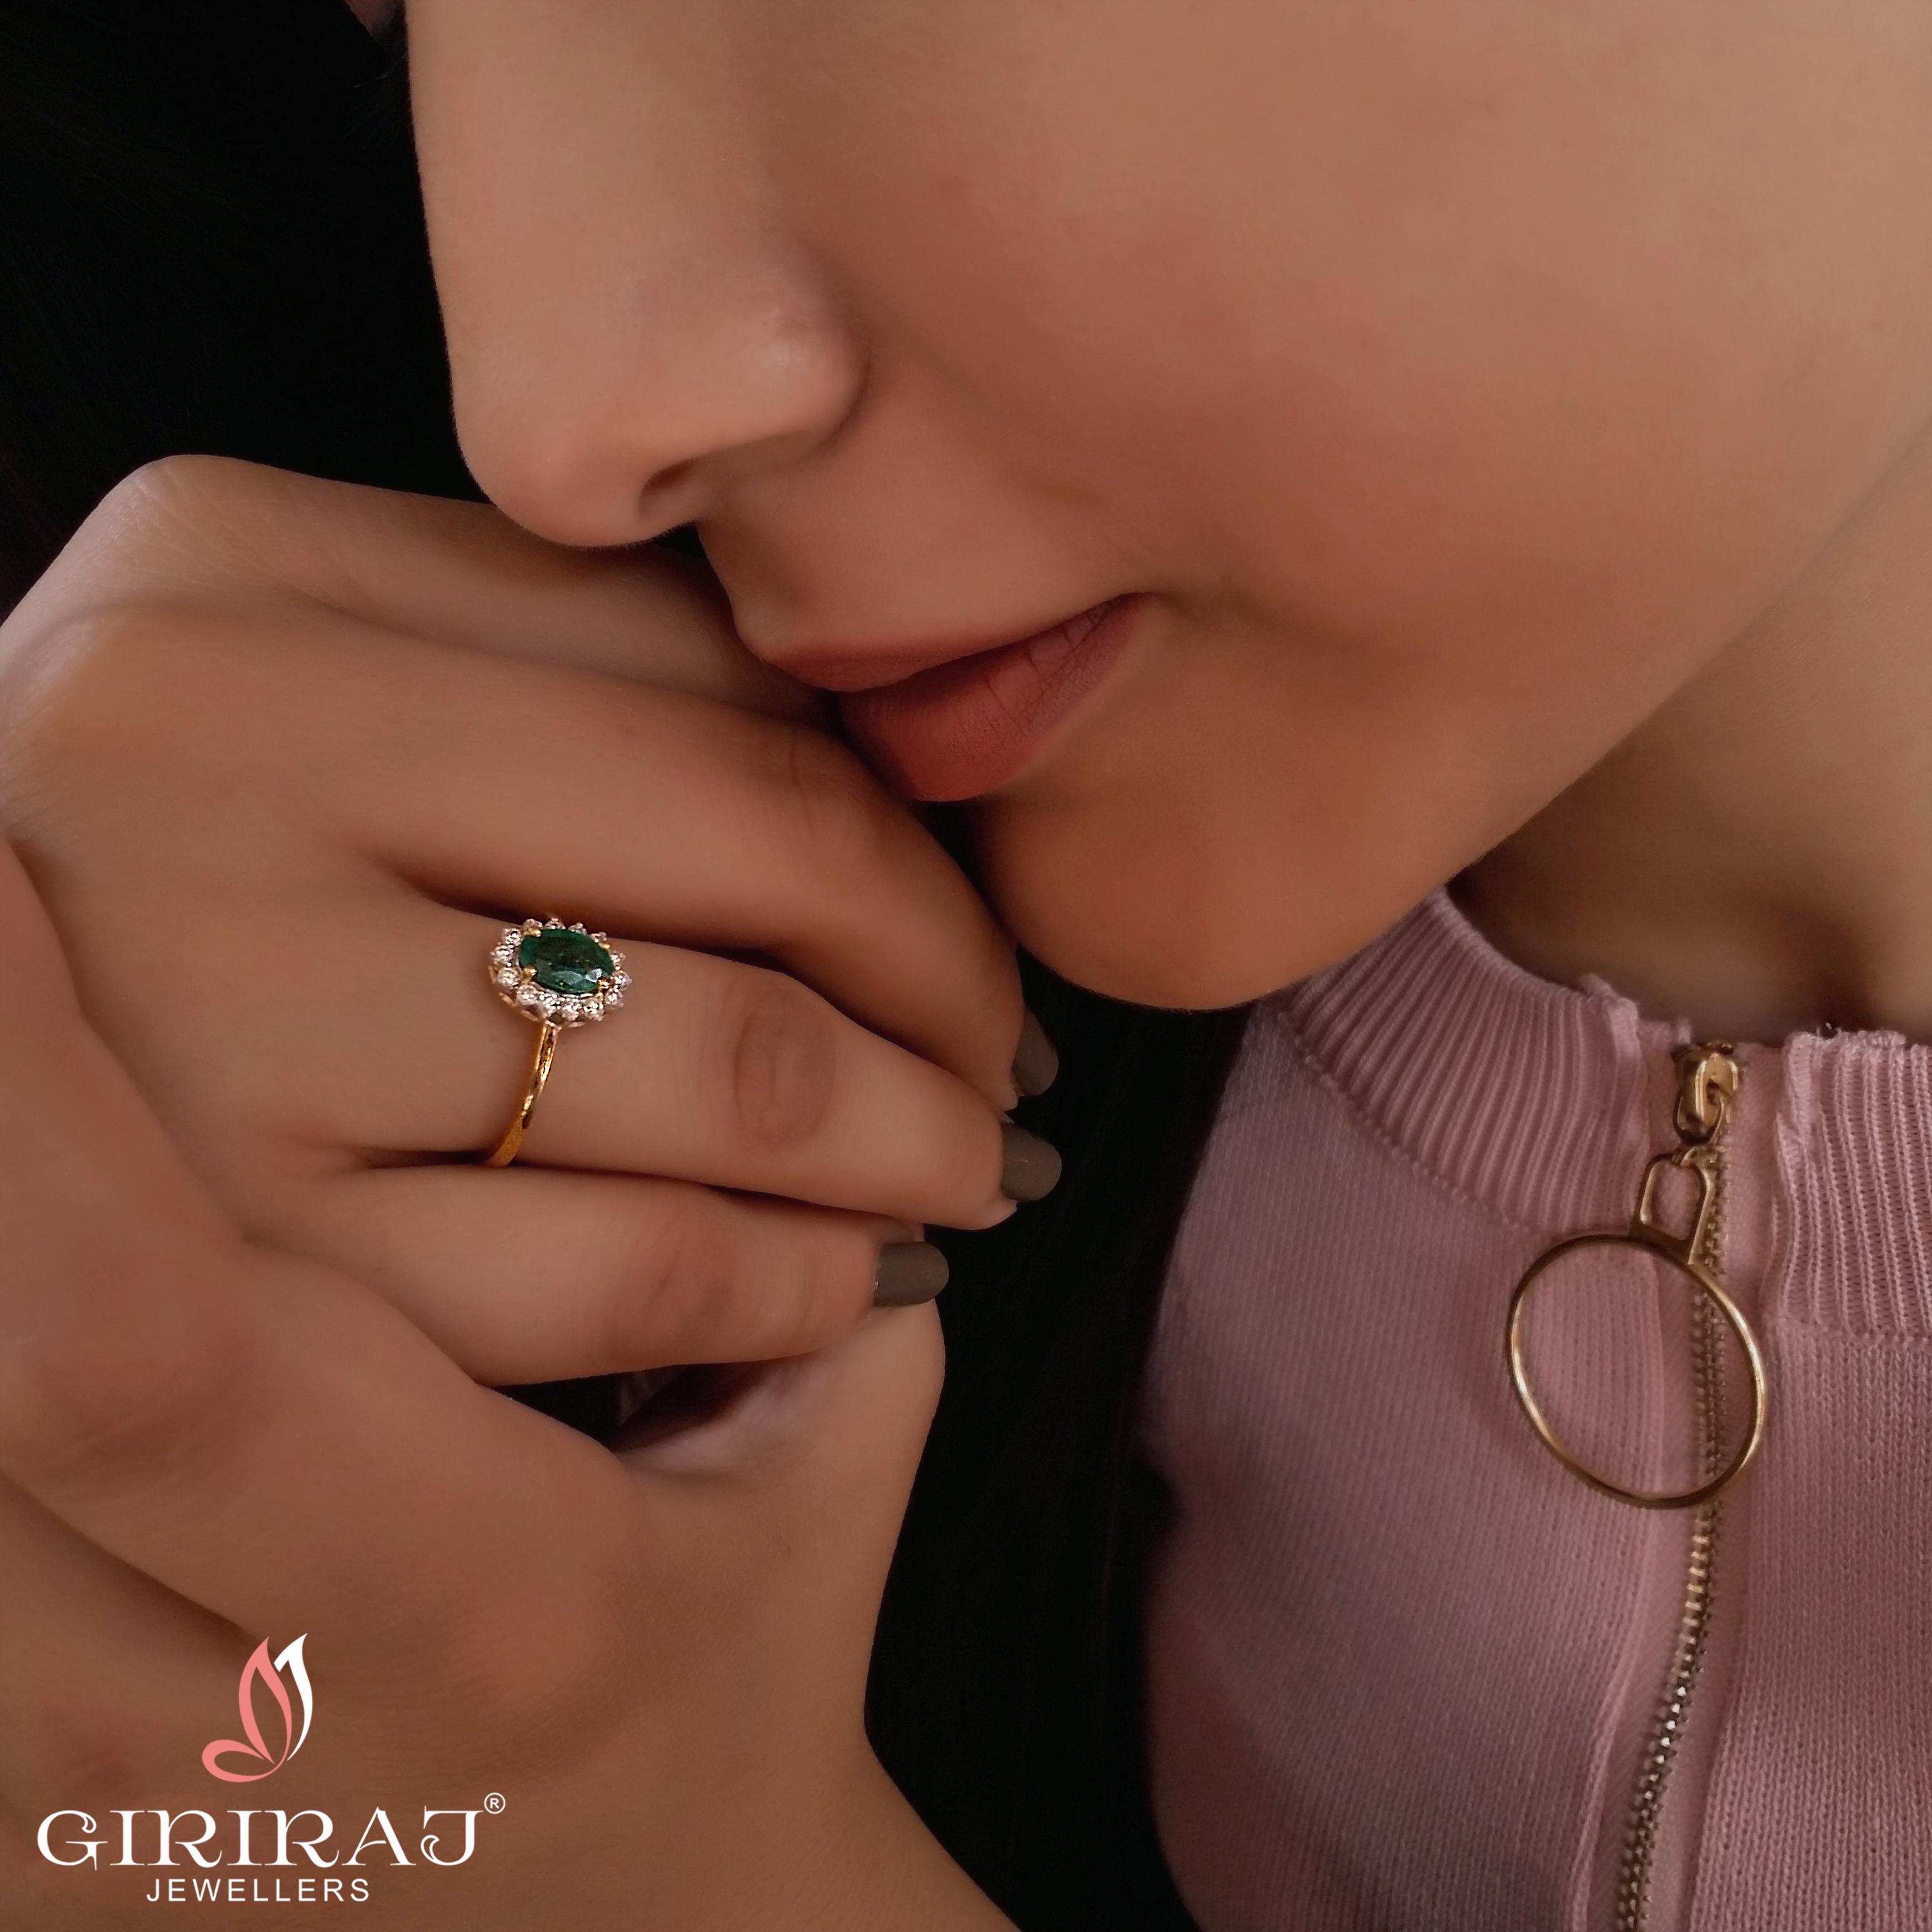 Buy Gemstone Jewelry / Genuine Opal Stone Ring / Emerald Ring / Online in  India - Etsy | Opal stone ring, Gemstone jewelry, Unique engagement rings